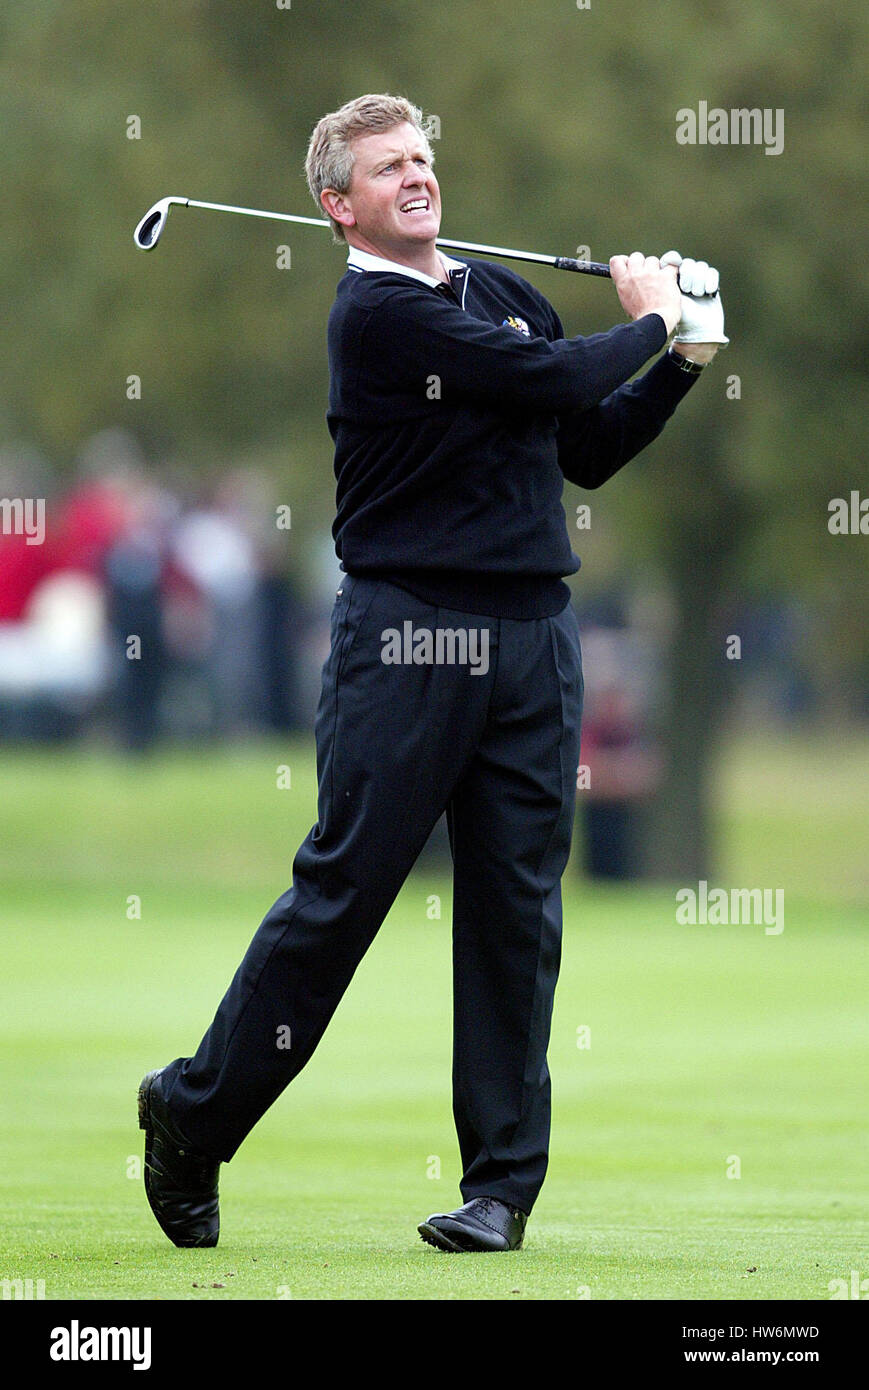 COLIN MONTGOMERIE RYDER CUP 02 8TH HOLE THE BELFRY SUTTON COLDFIELD BIRMINGHAM ENGLAND 28 September 2002 Stock Photo